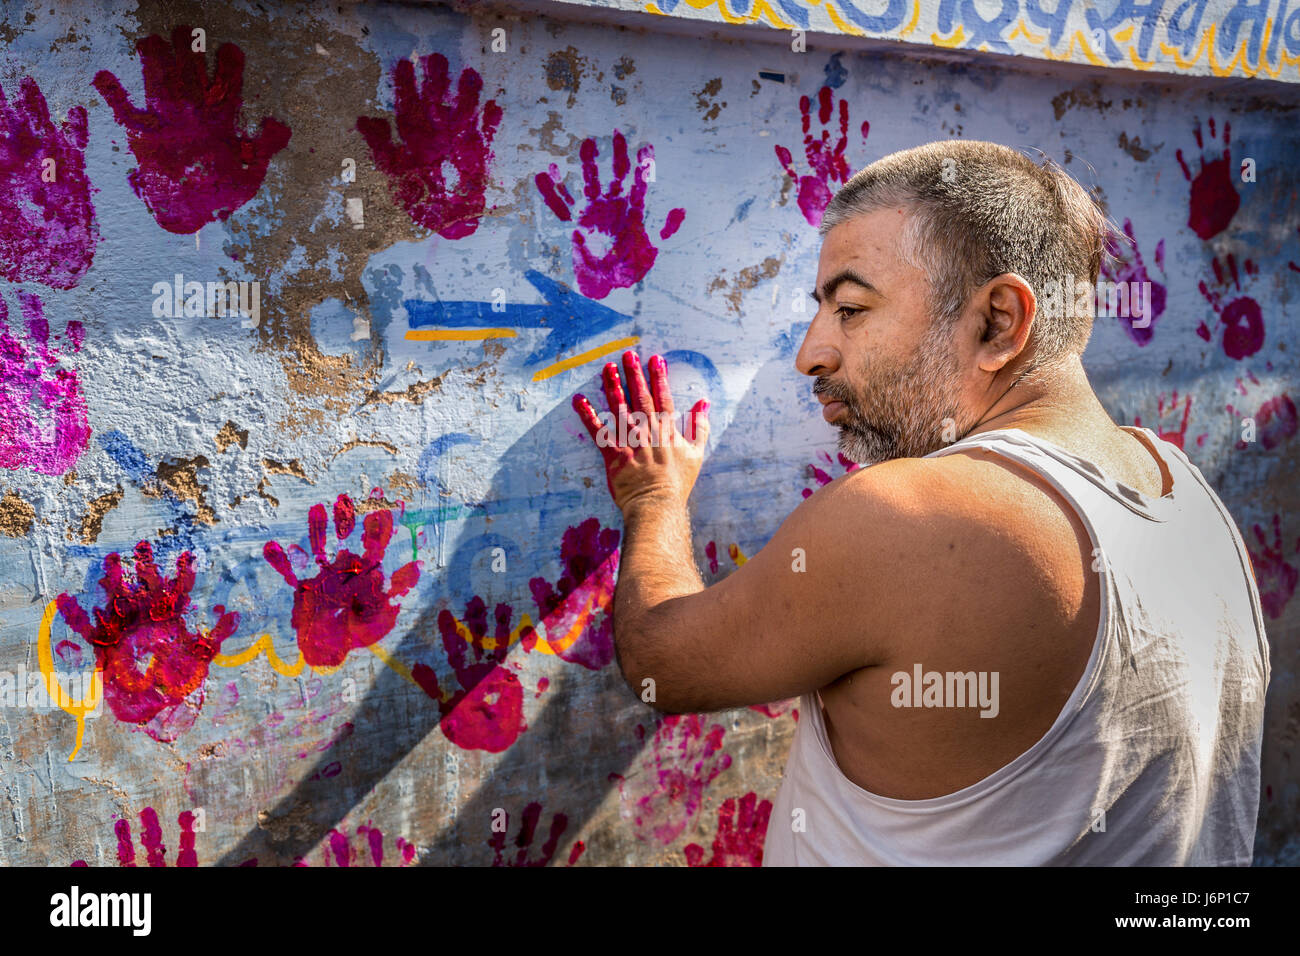 A brahmin makes red hand prints on a wall in Jodhpur, Rajasthan, India Stock Photo